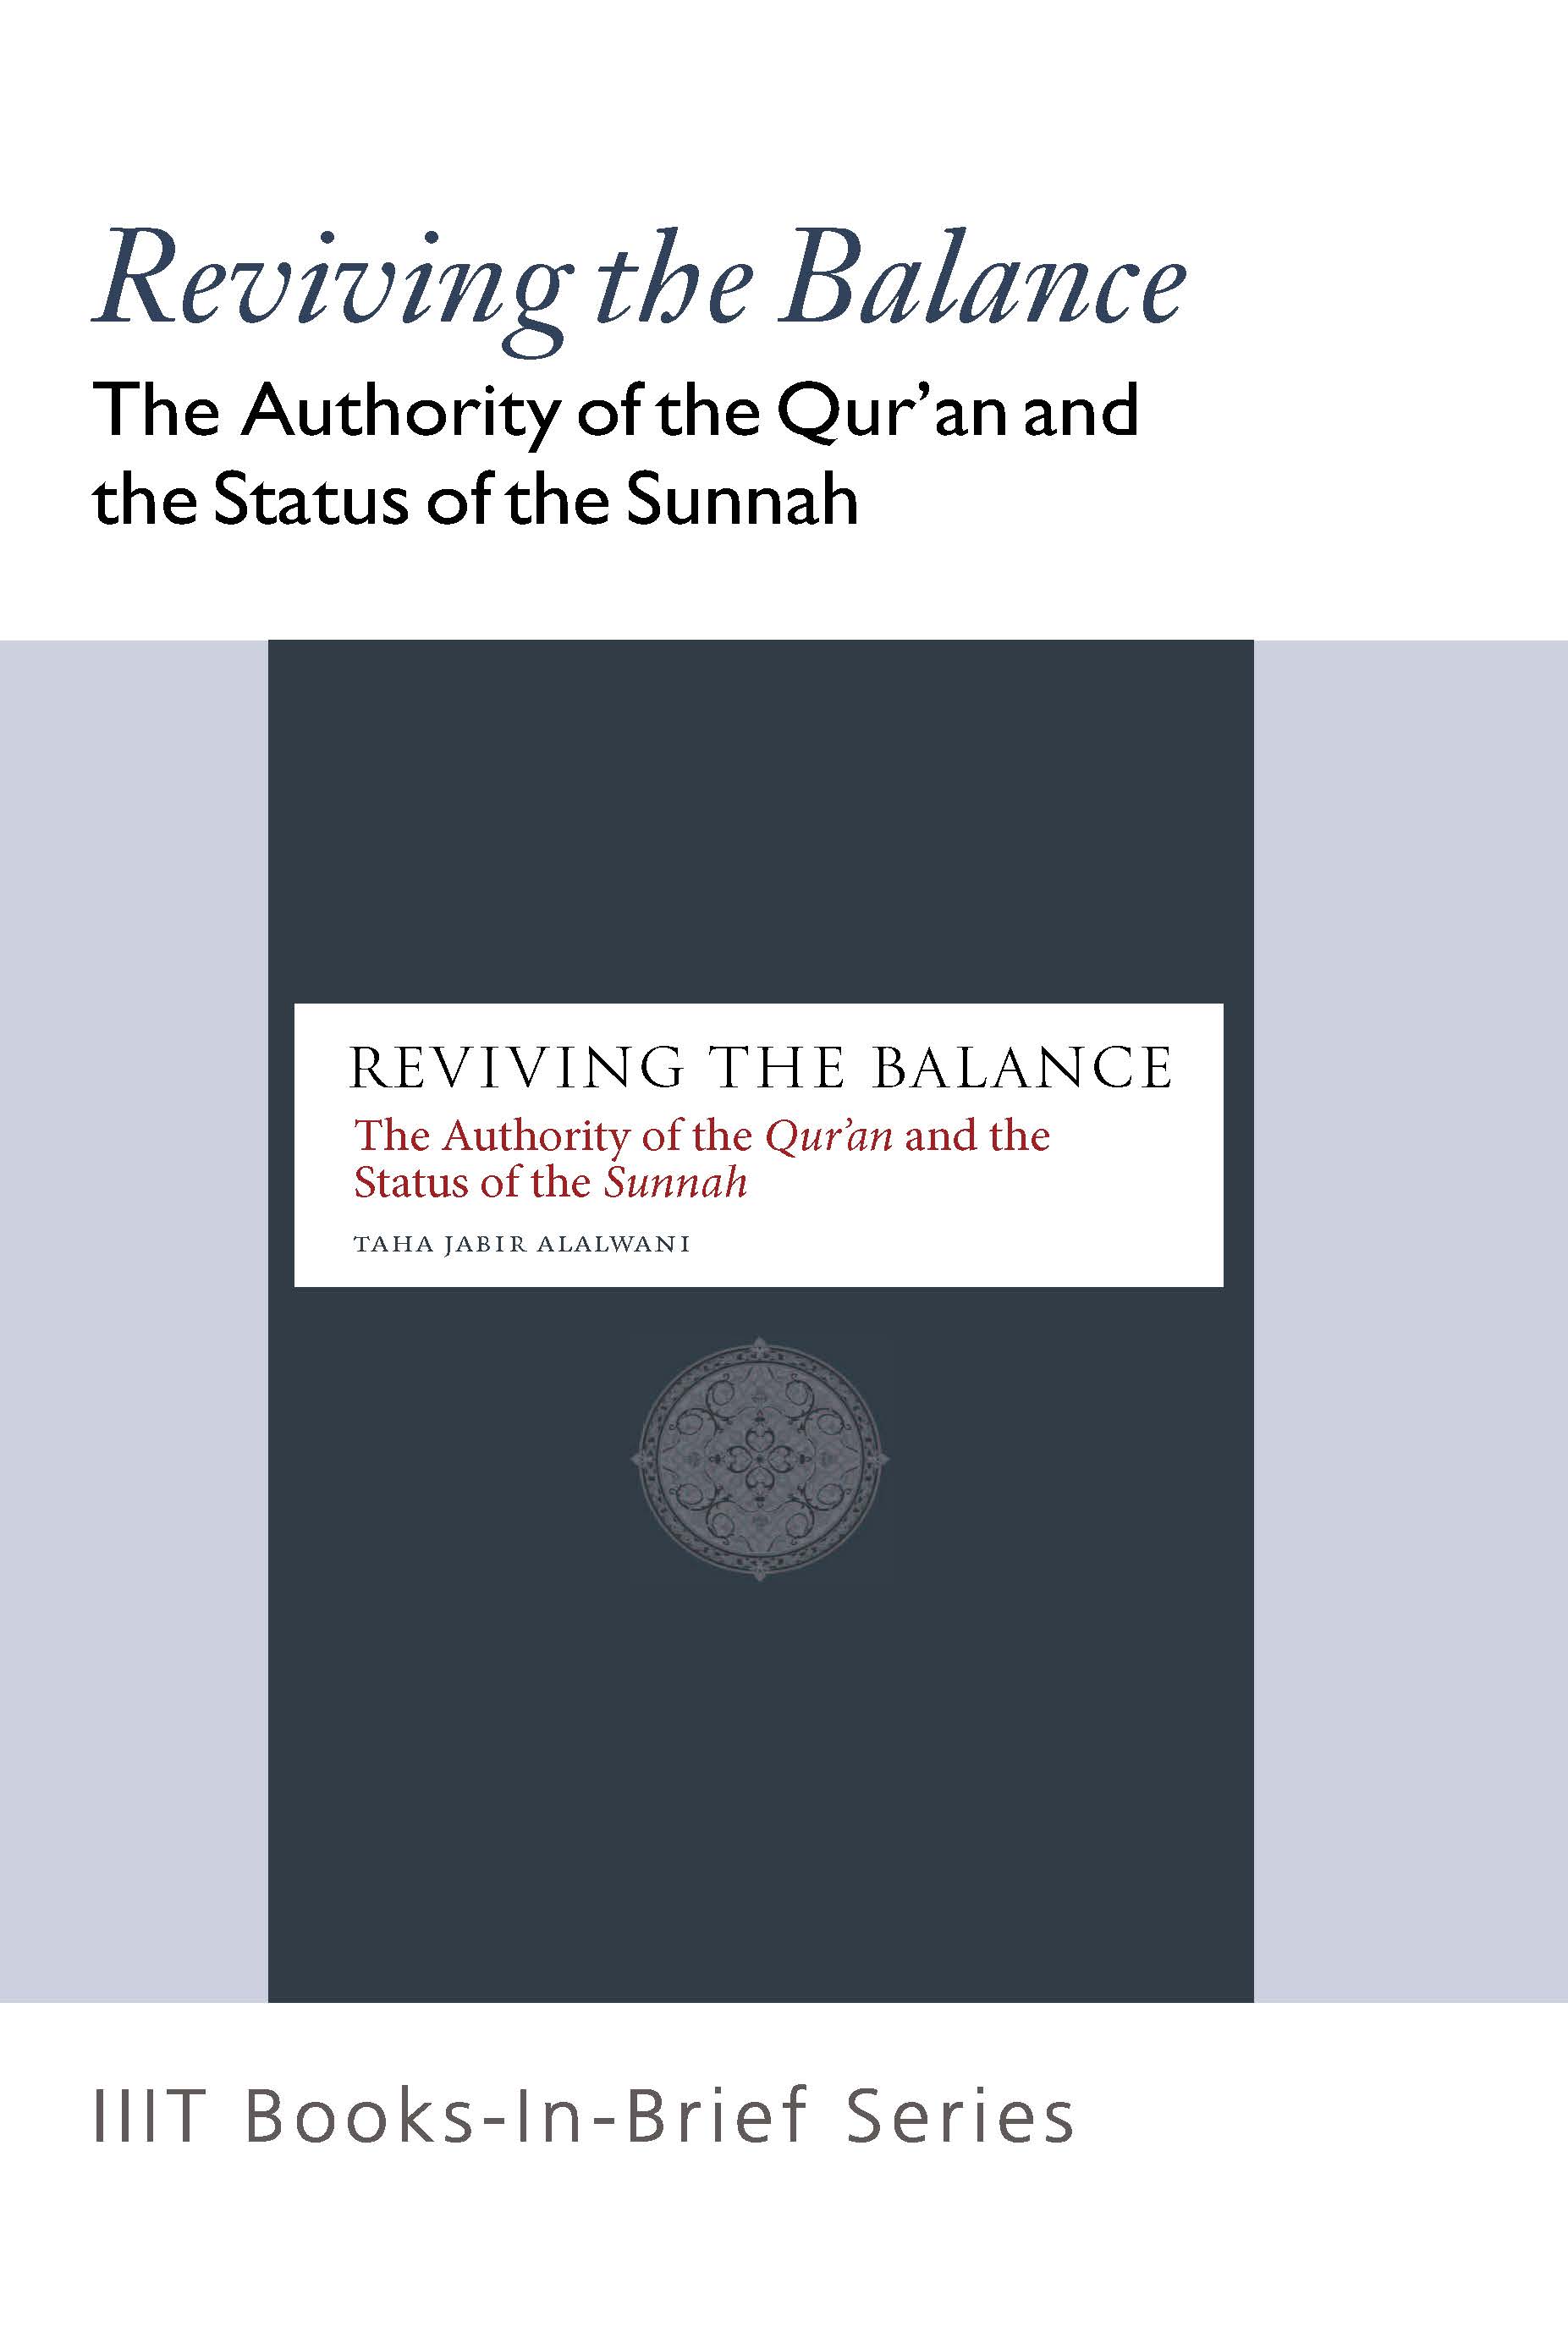 BIB Reviving the Balance: The Authority of the Qur’an and the Status of the Sunnah